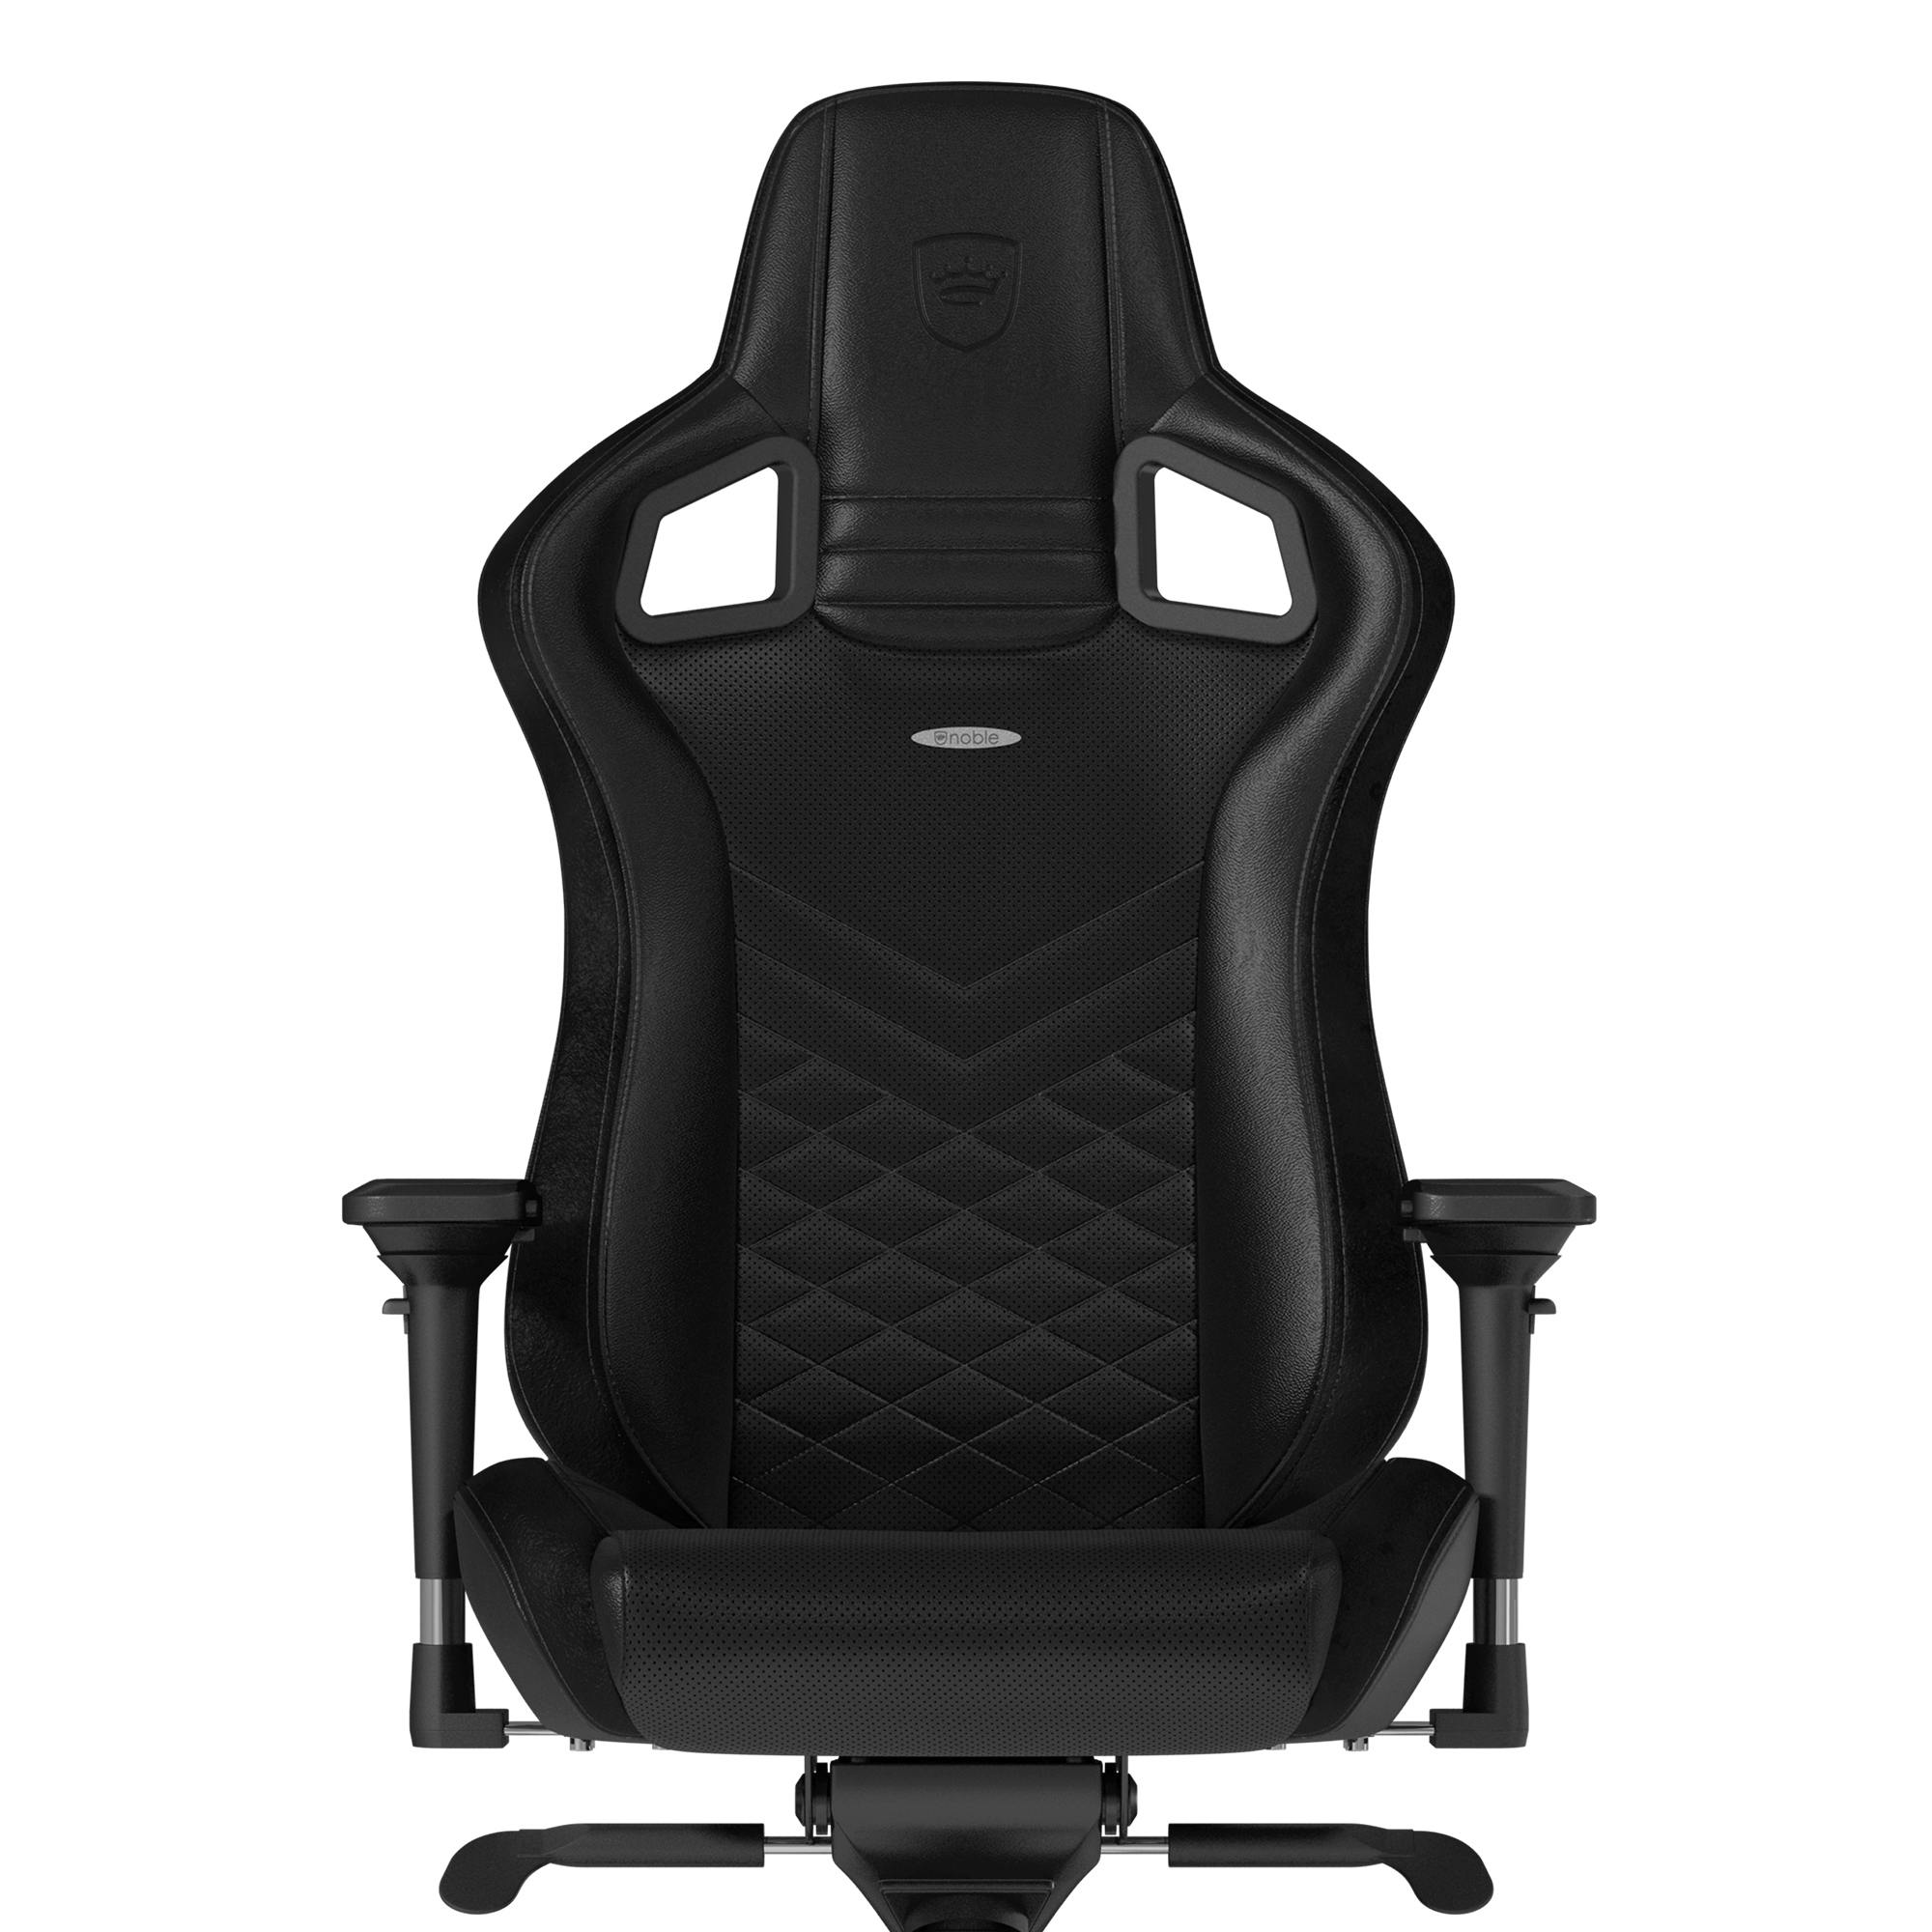 Black noblechairs Epic Gaming Chair 135° Reclinable Desk Chair Office Chair Lumbar Support Cushion 265 lbs Racing Seat Design PU Faux Leather